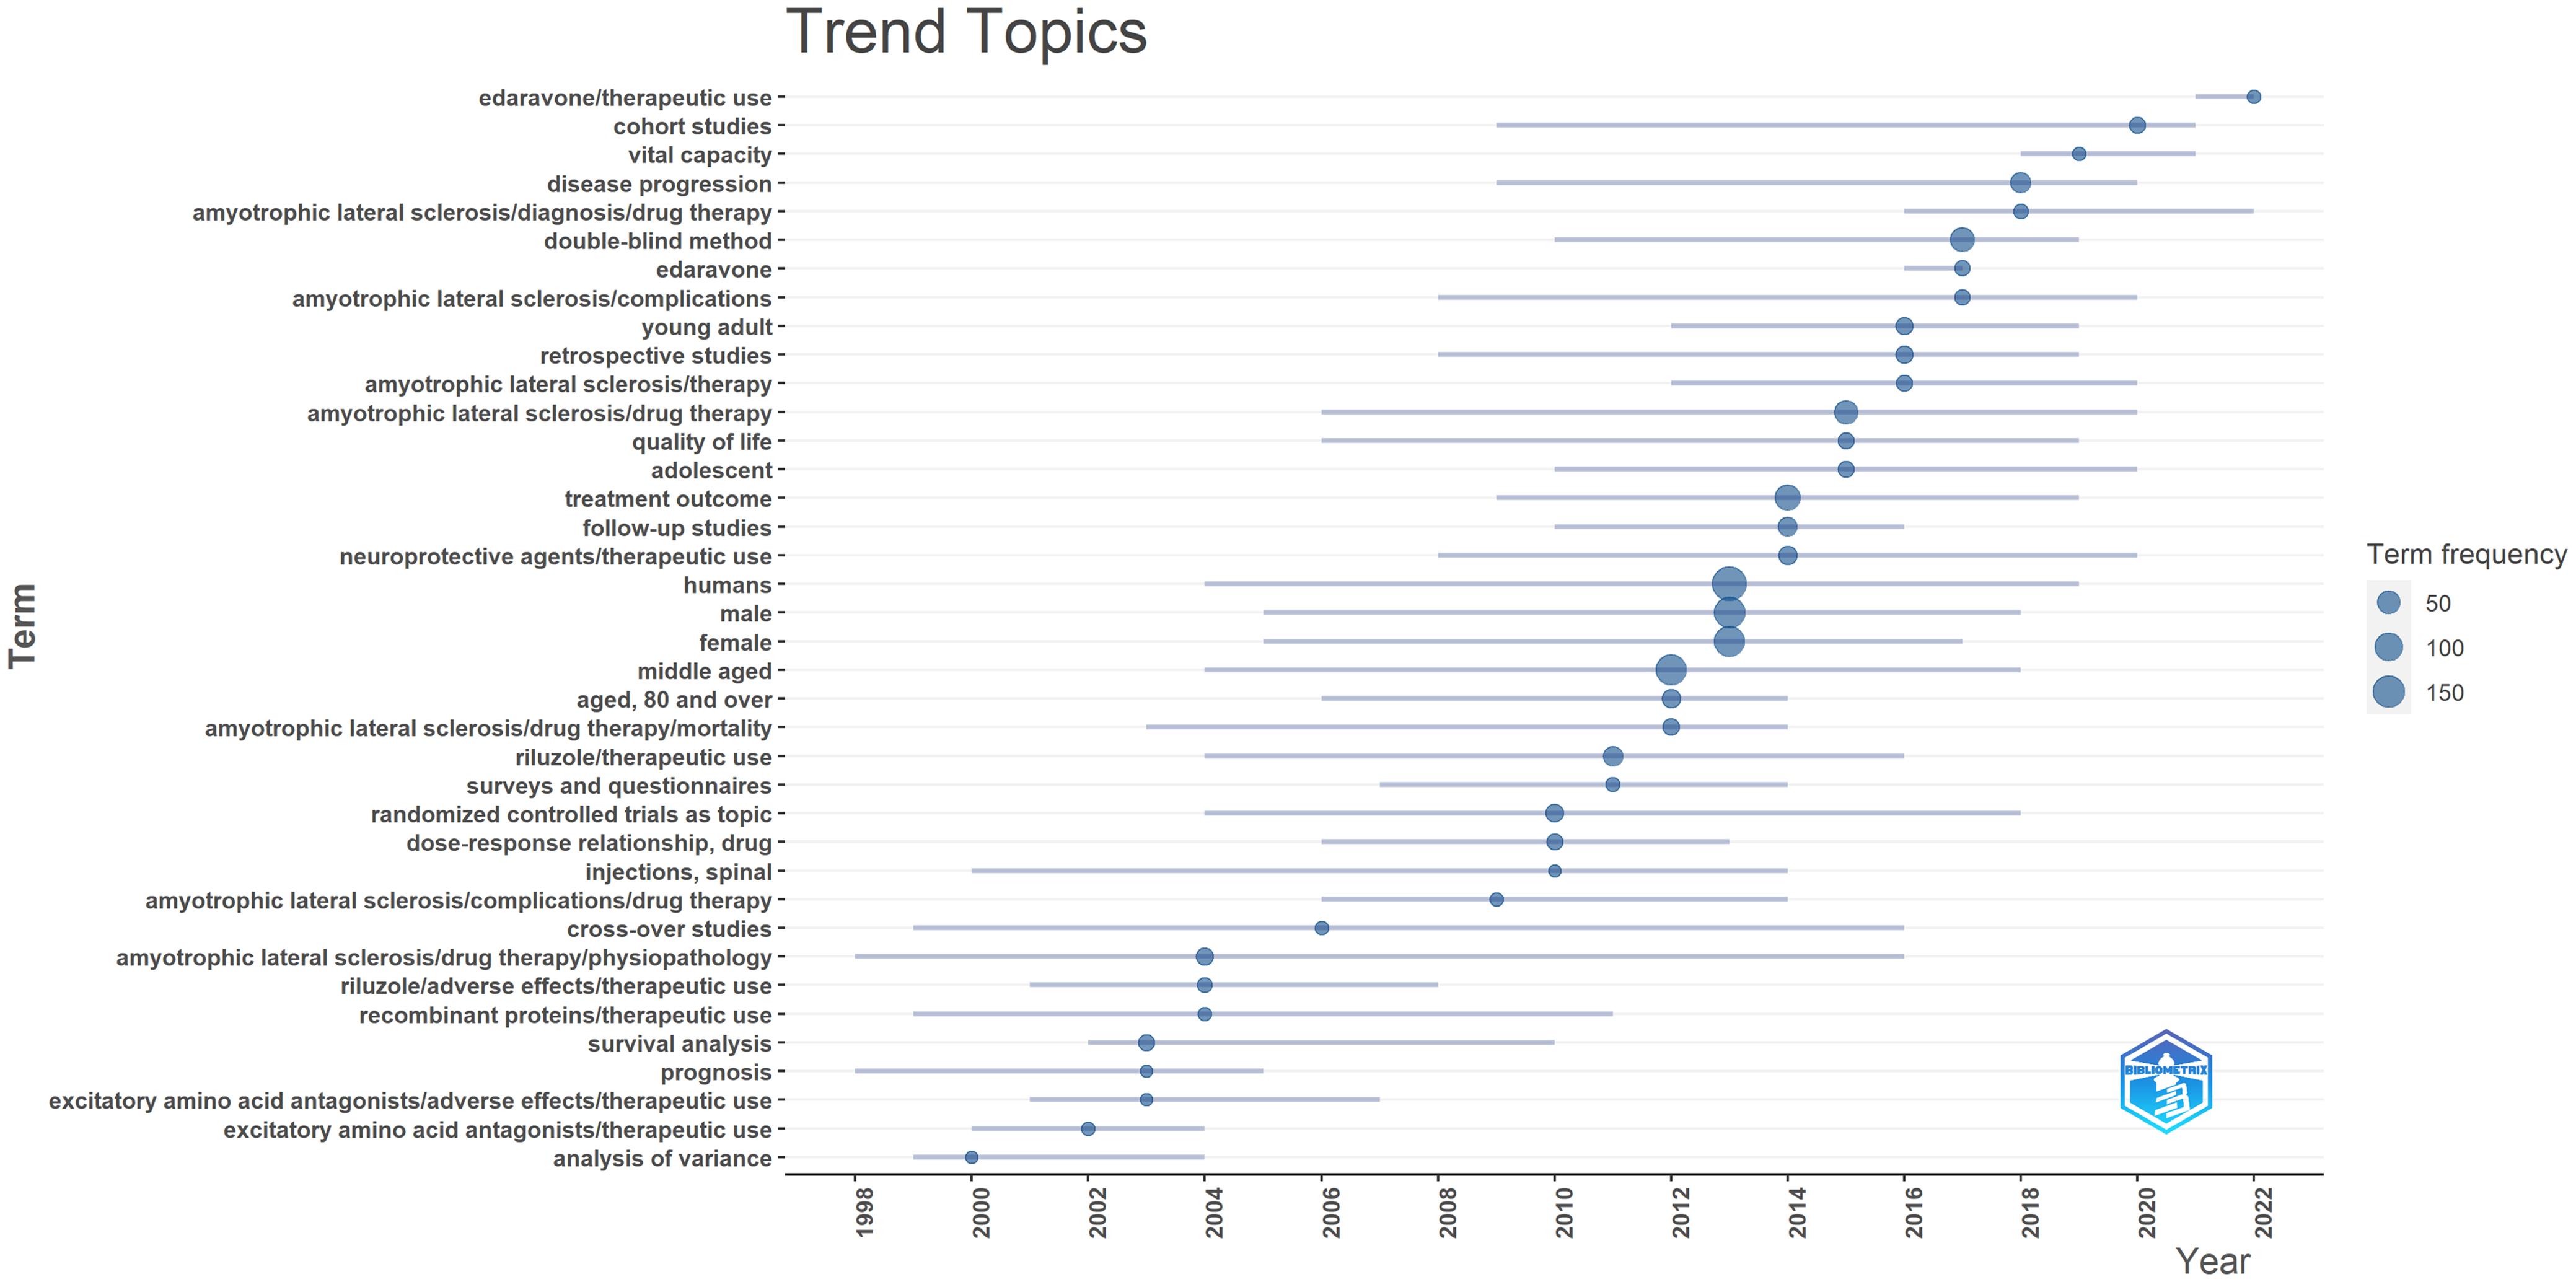 Trend topics of amyotrophic lateral sclerosis studies.